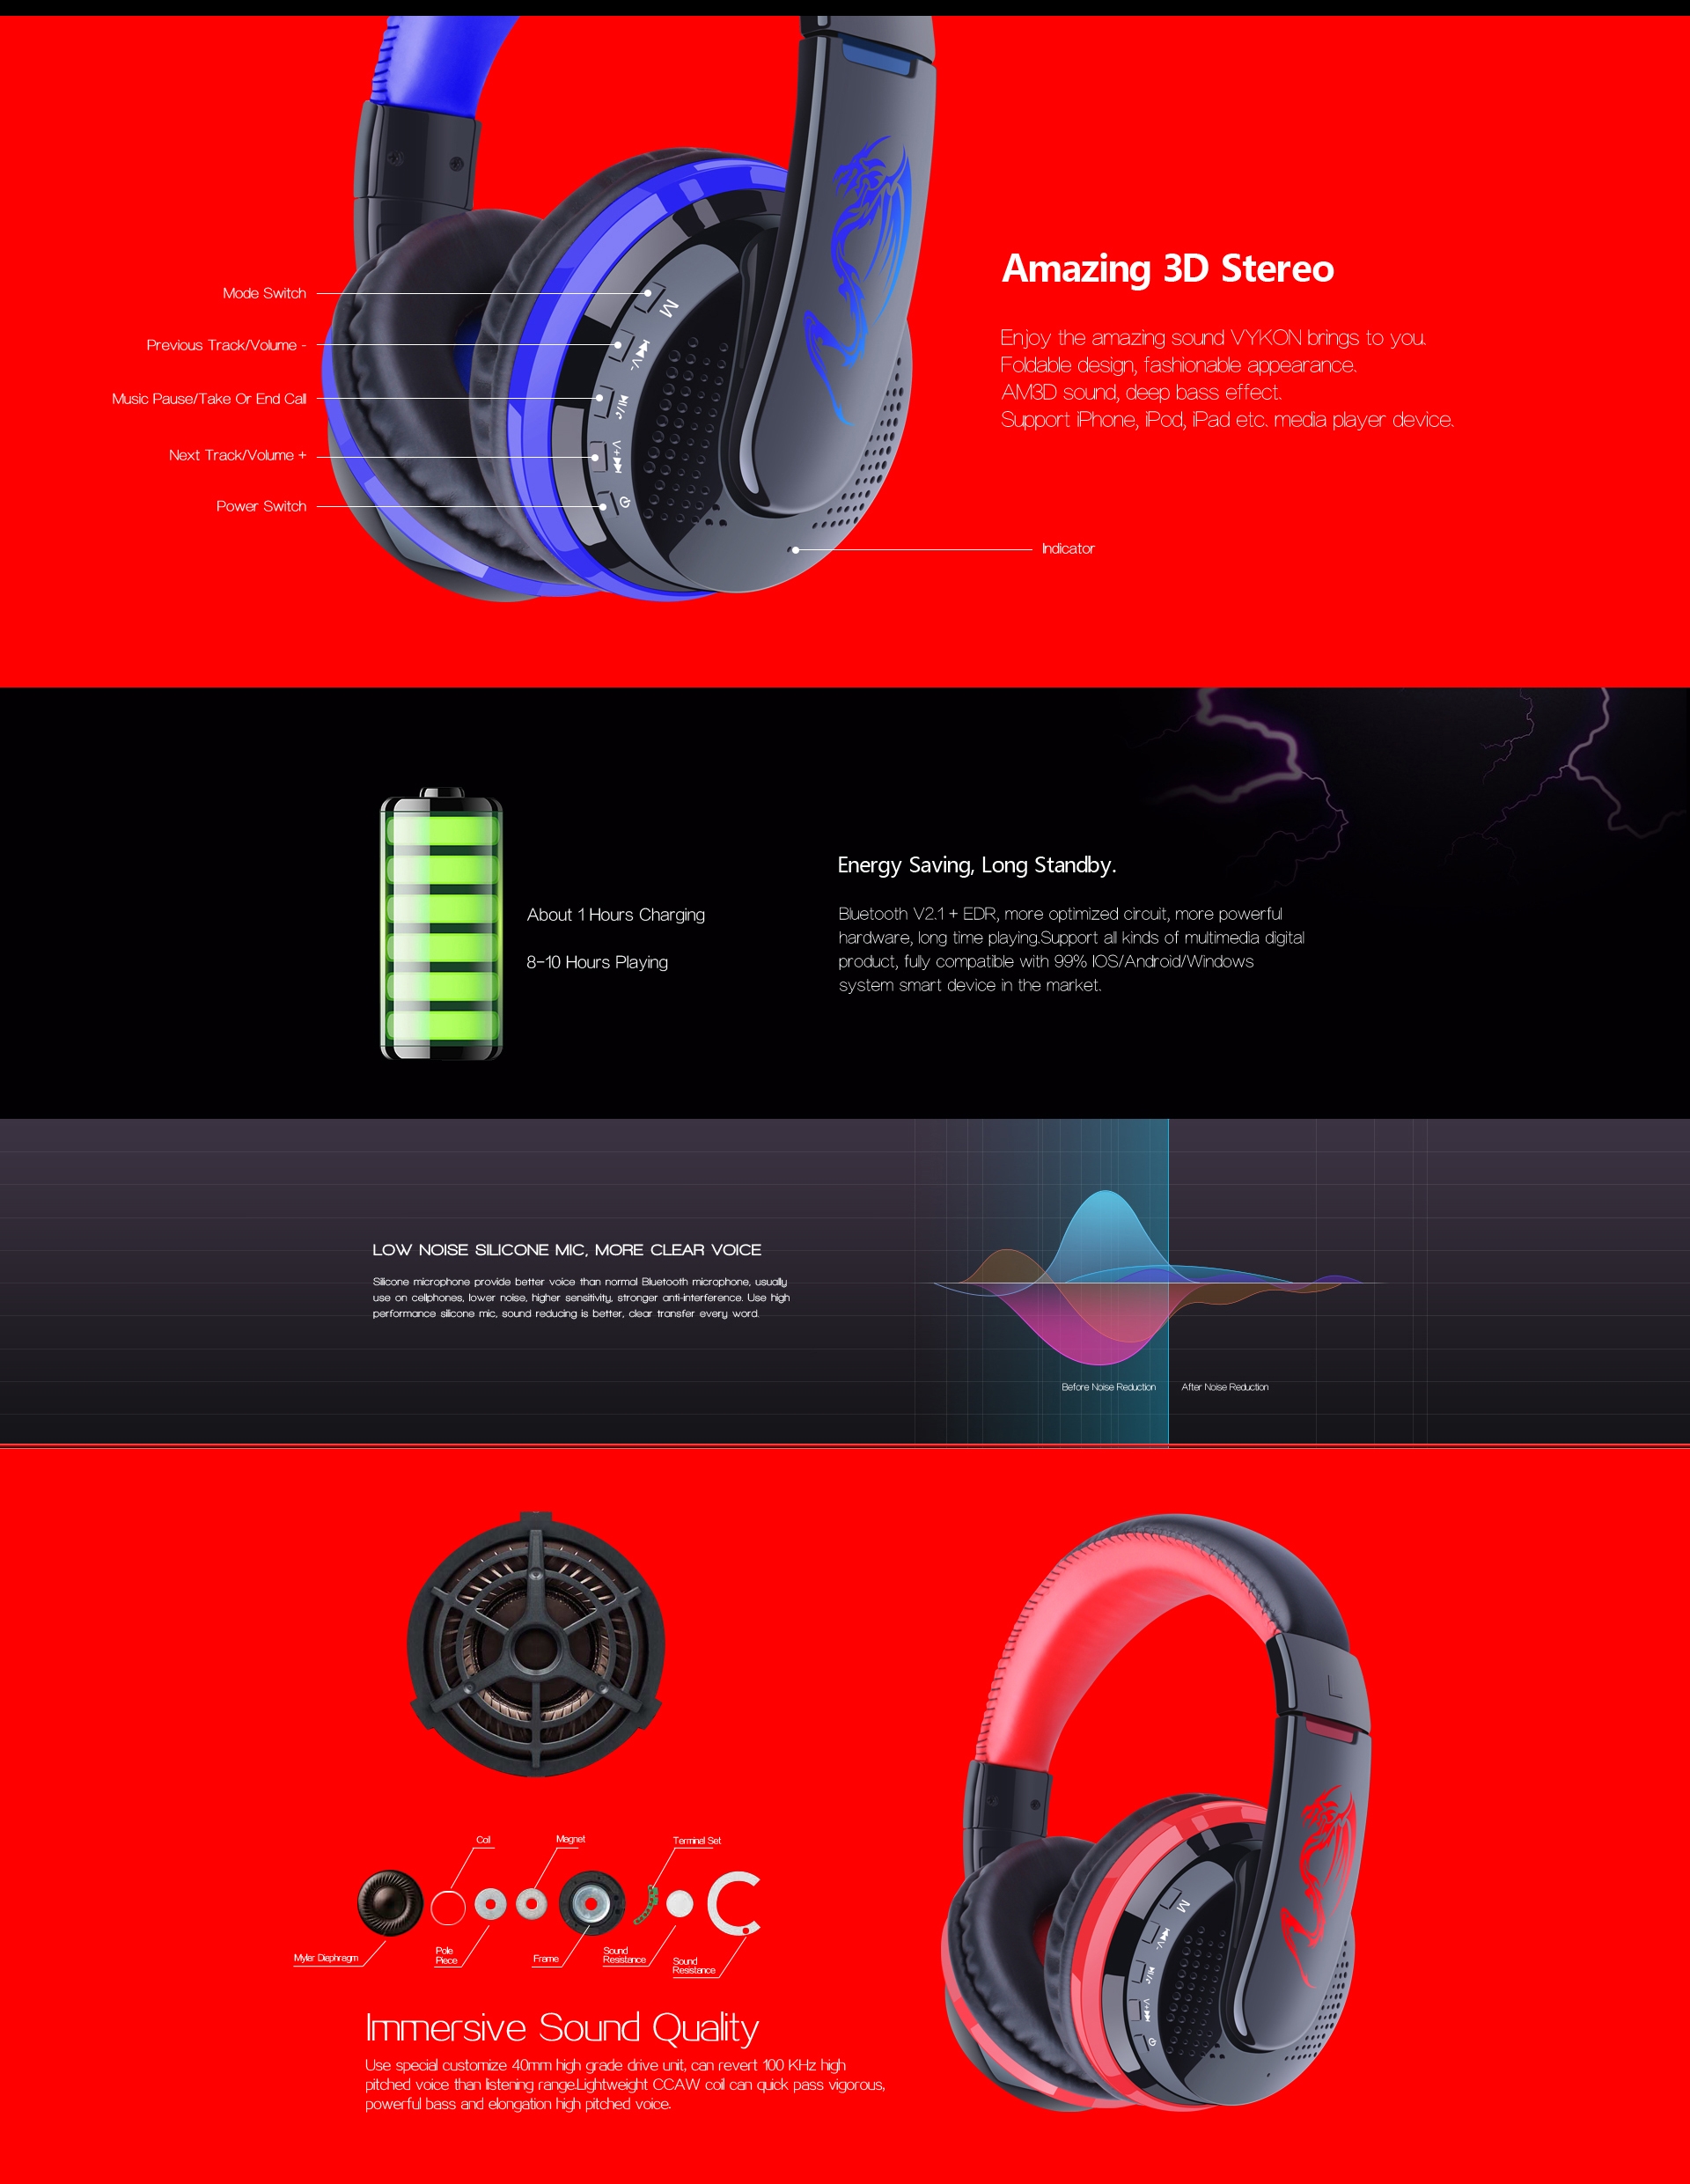 OVLENG MX666 Wireless Bluetooth Music Headphones with Mic Noise Canceling - Red 2